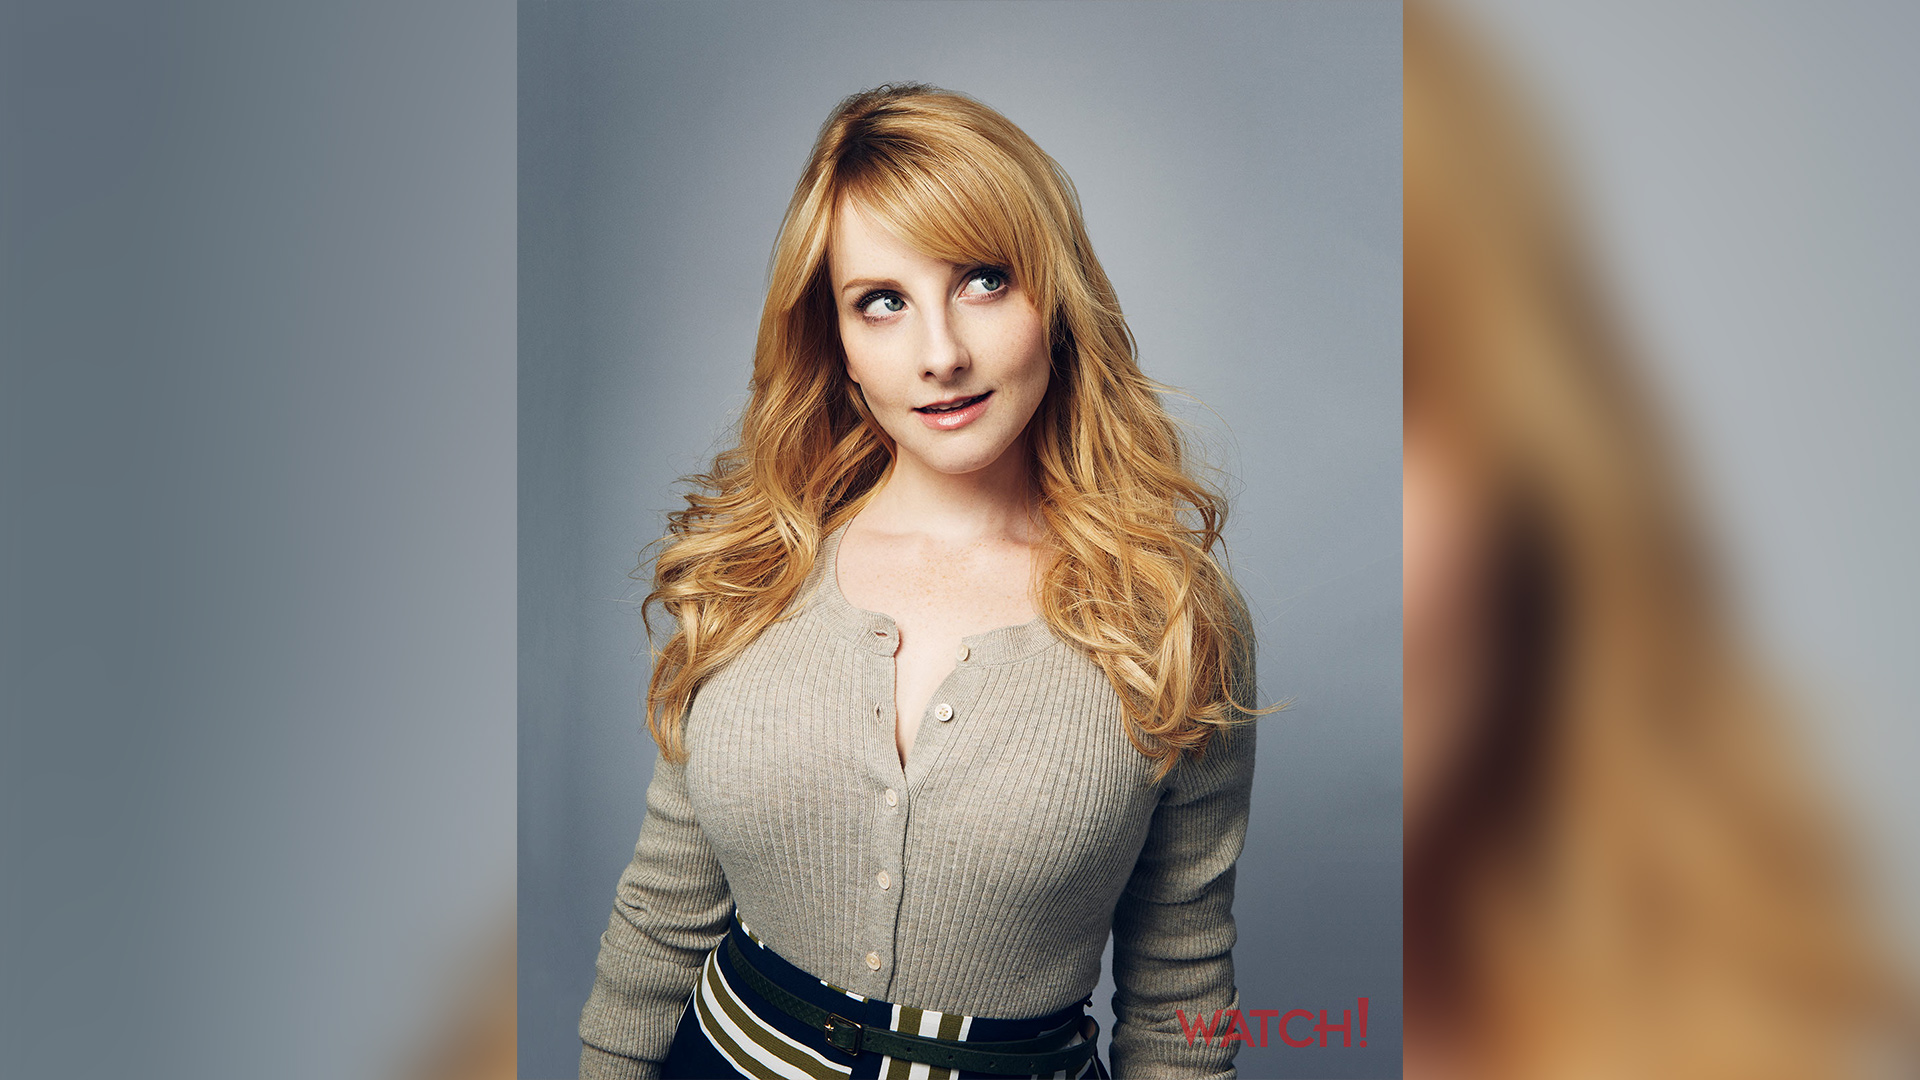 Melissa Rauch Of The Big Bang Theory Is Mesmerizing In These